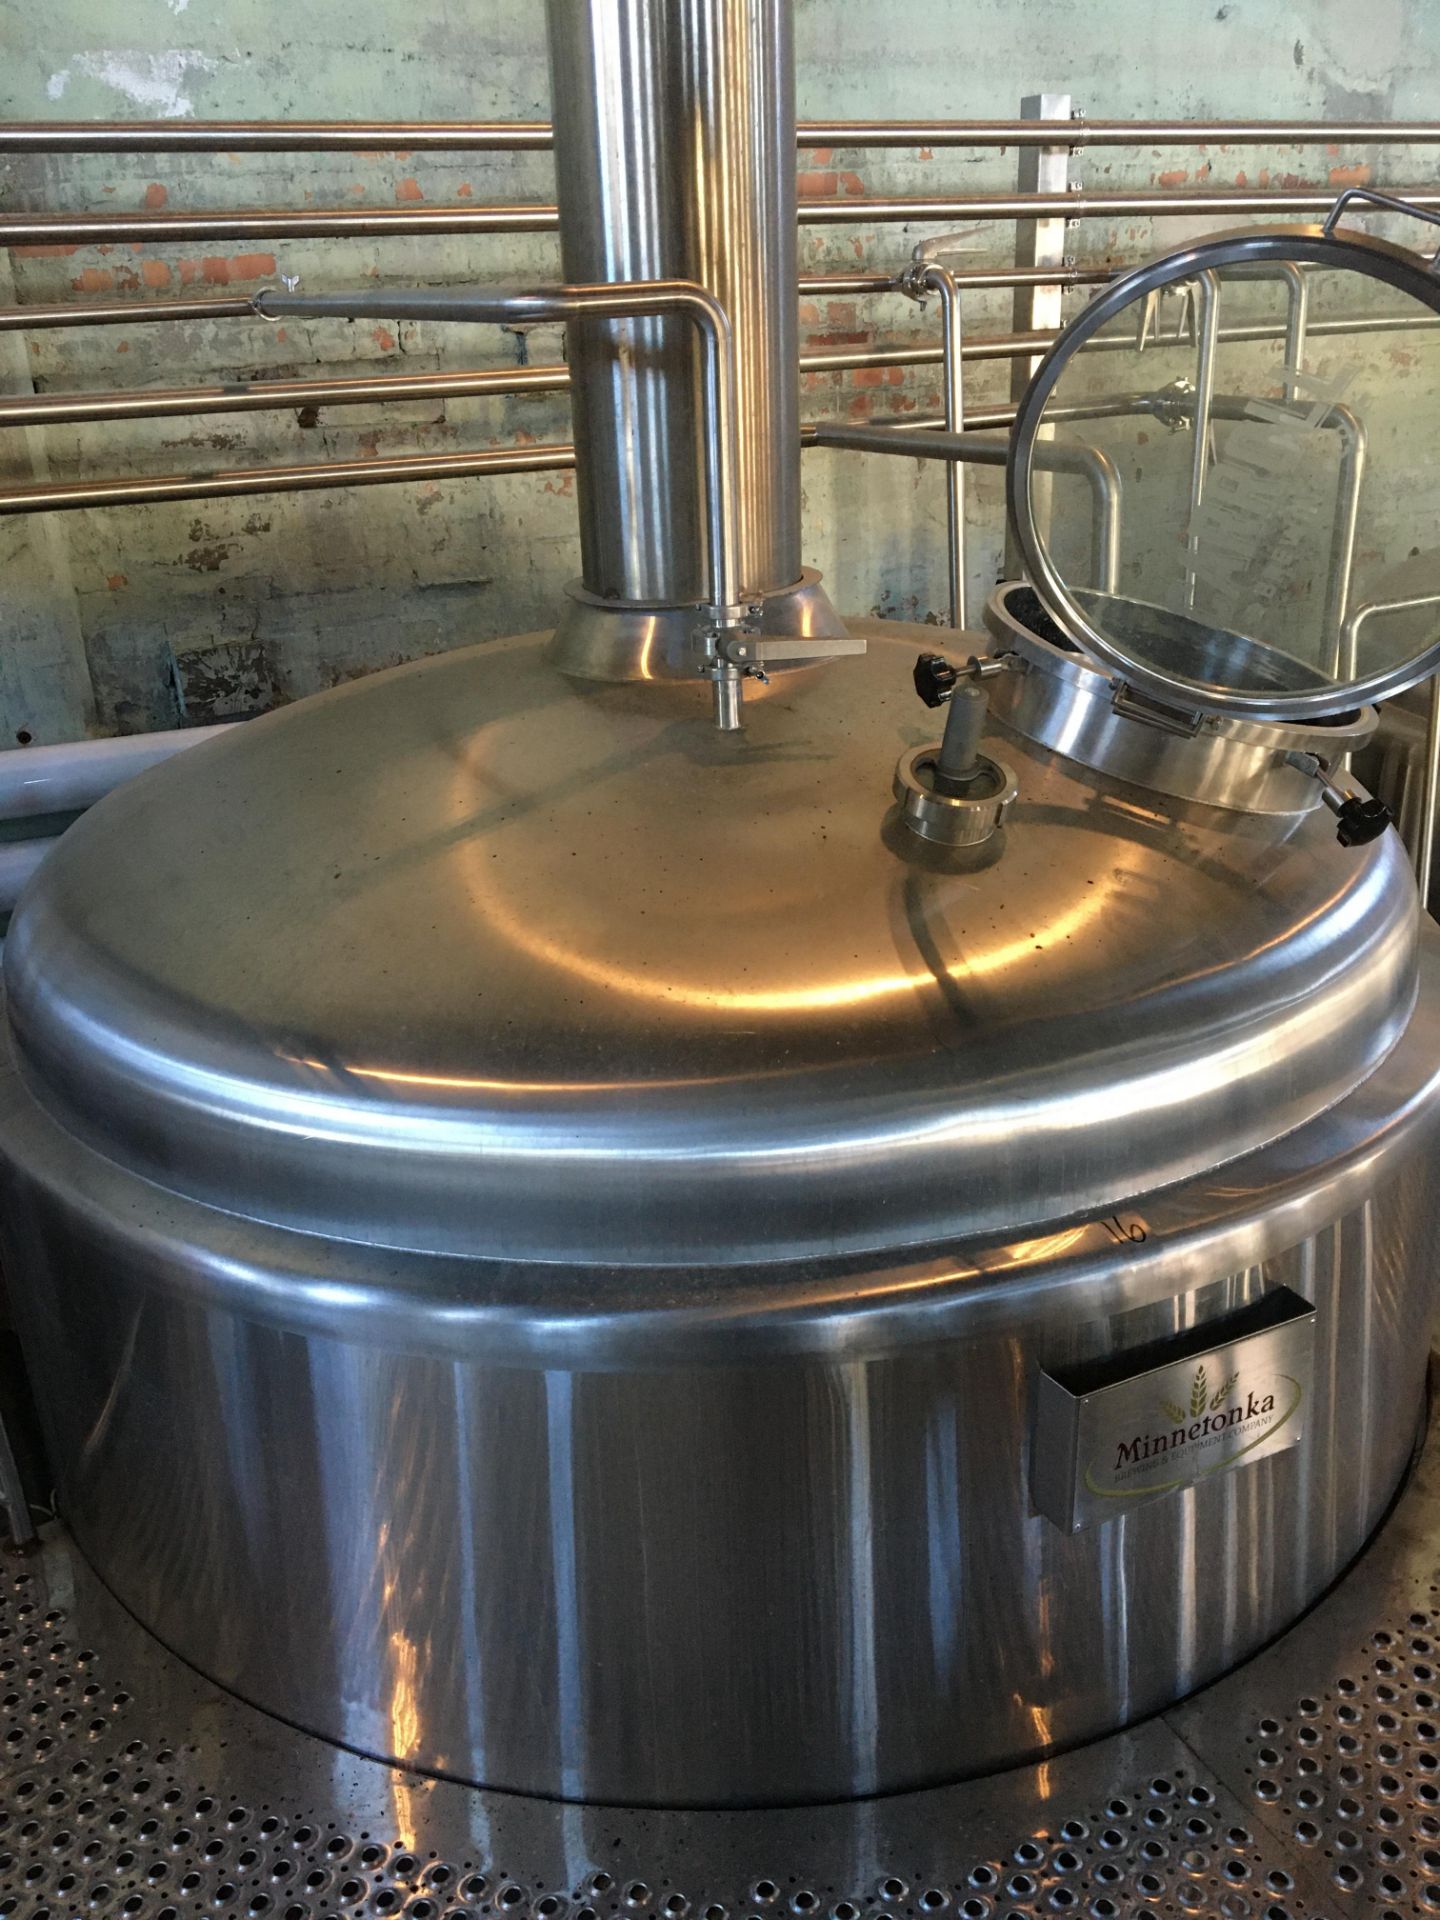 Complete 20 BBL Brewhouse Including 20-BBL Minnetonka Whirlpool Tank Stainless Steel; - Image 27 of 75